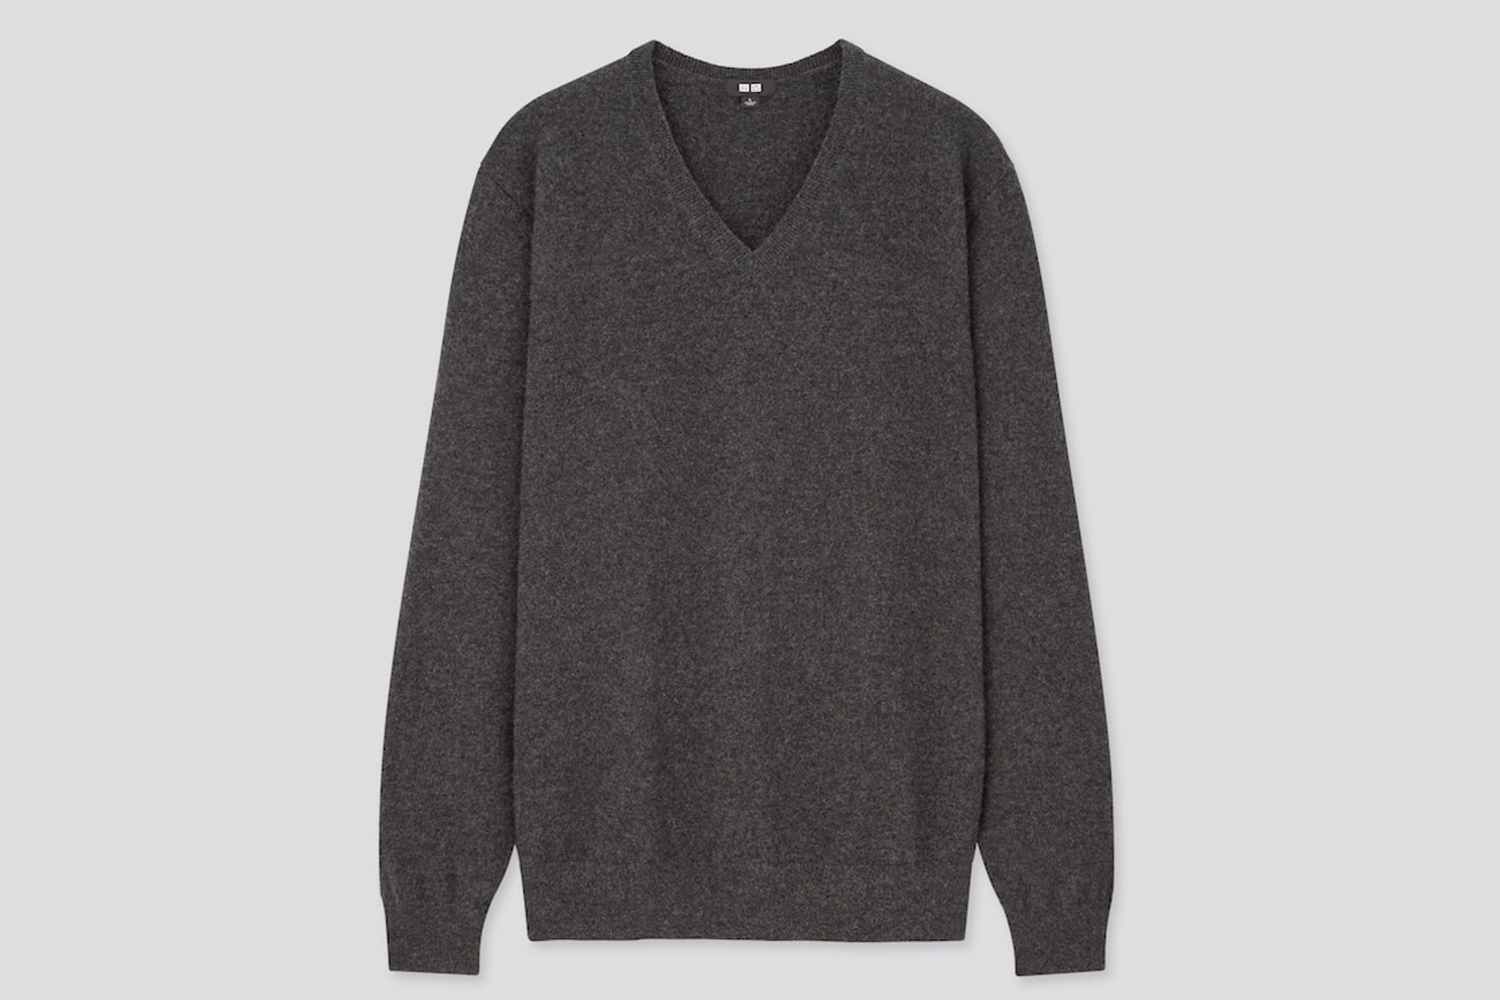 Deal: This Uniqlo Cashmere Sweater Is Just $50